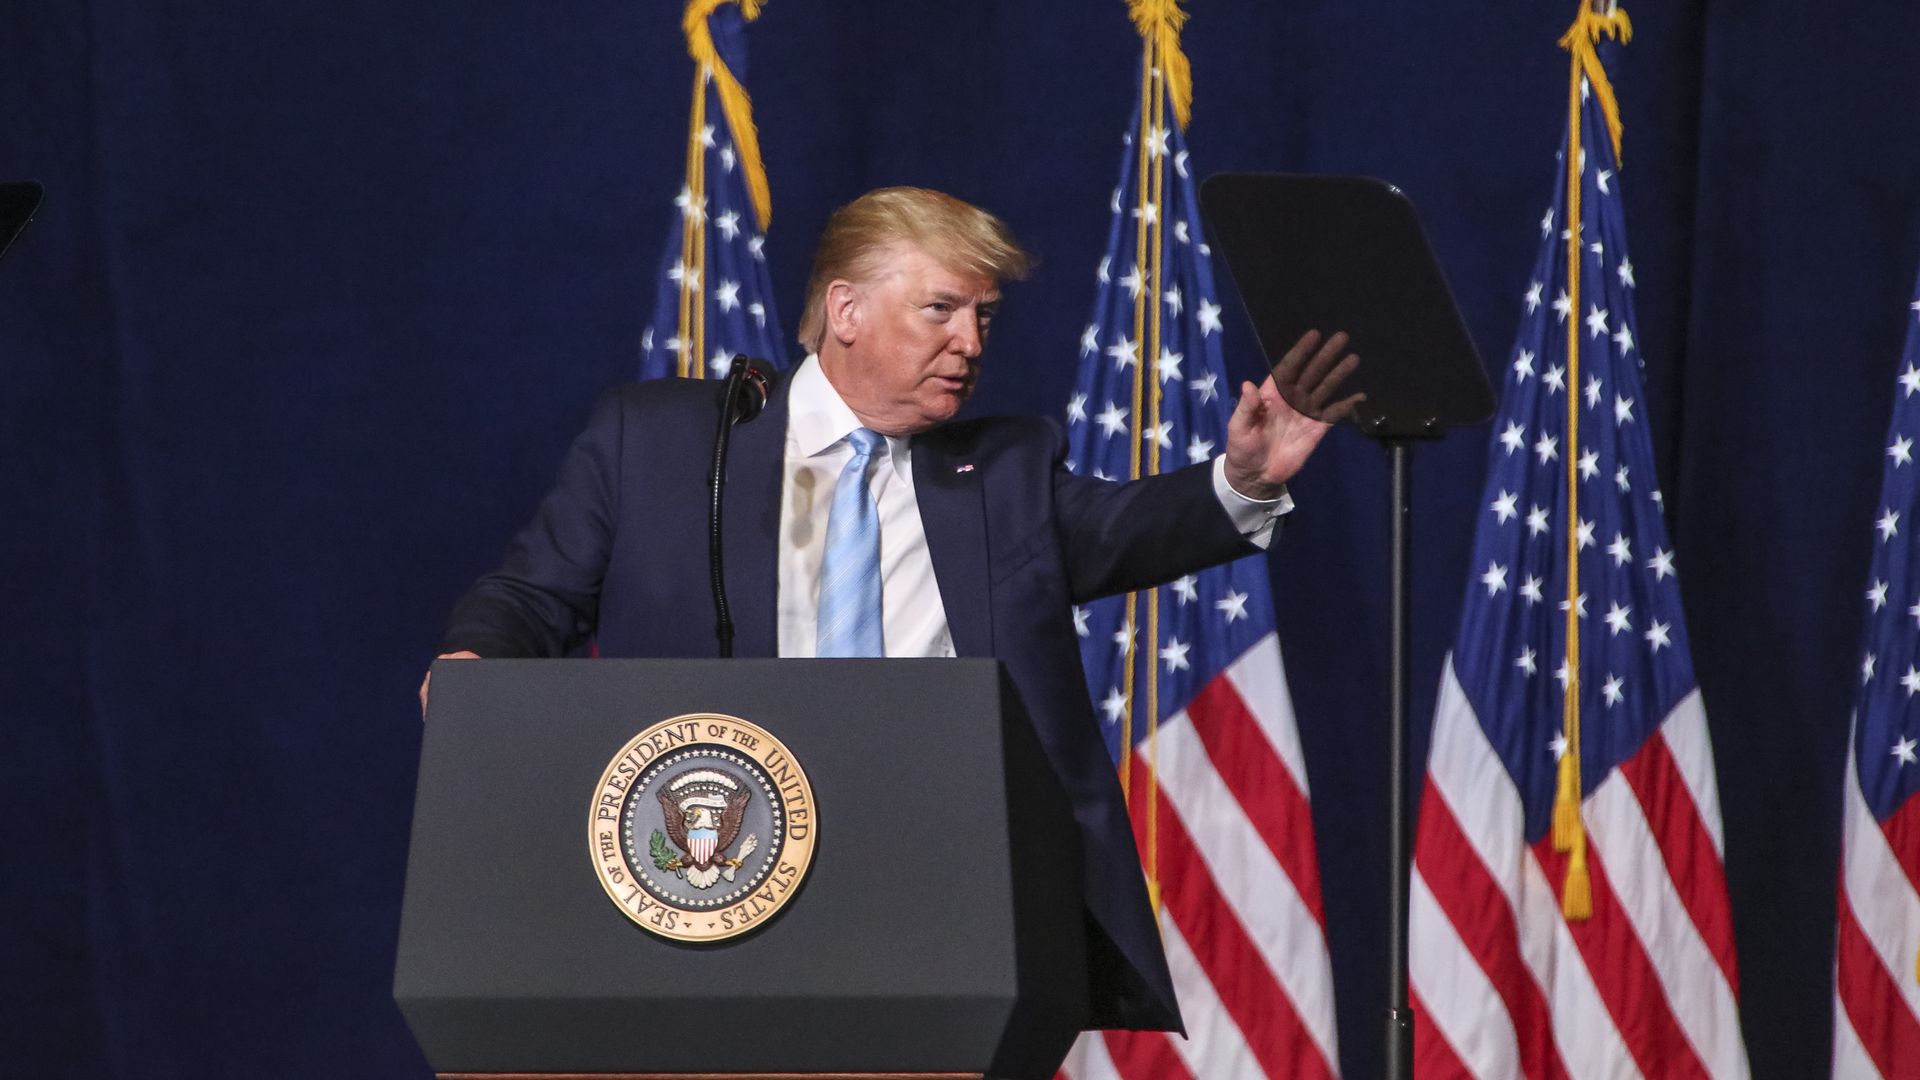 In this image, Trump waves while standing in front of several American flags.